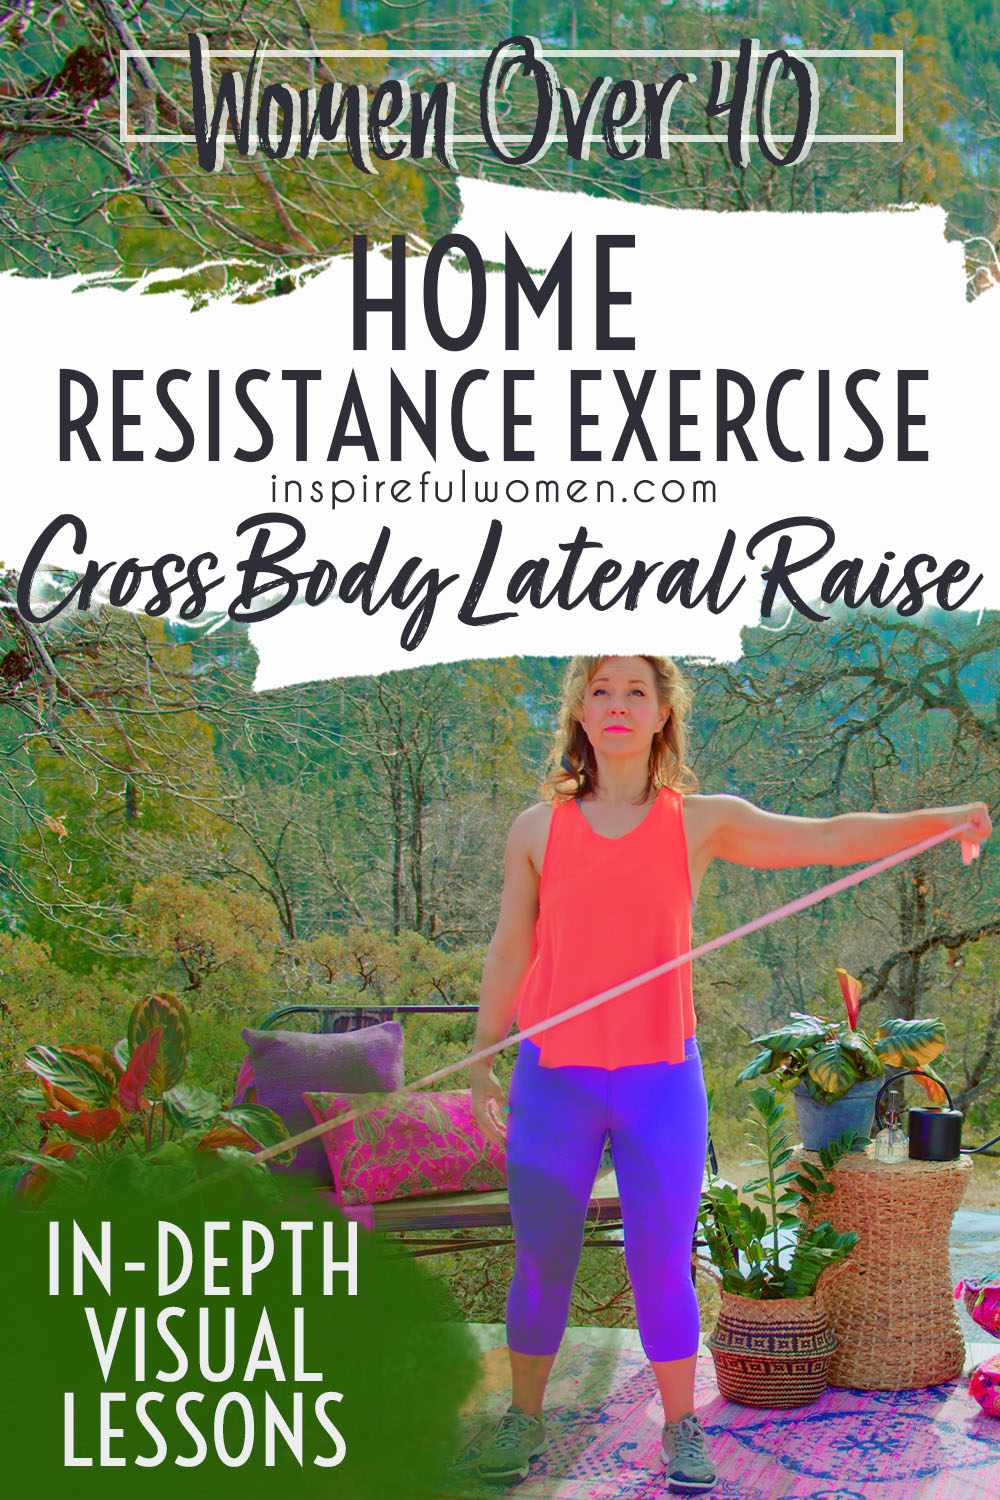 band-cross-body-lateral-raise-home-weight-training-shoulder-exercise-women-over-40